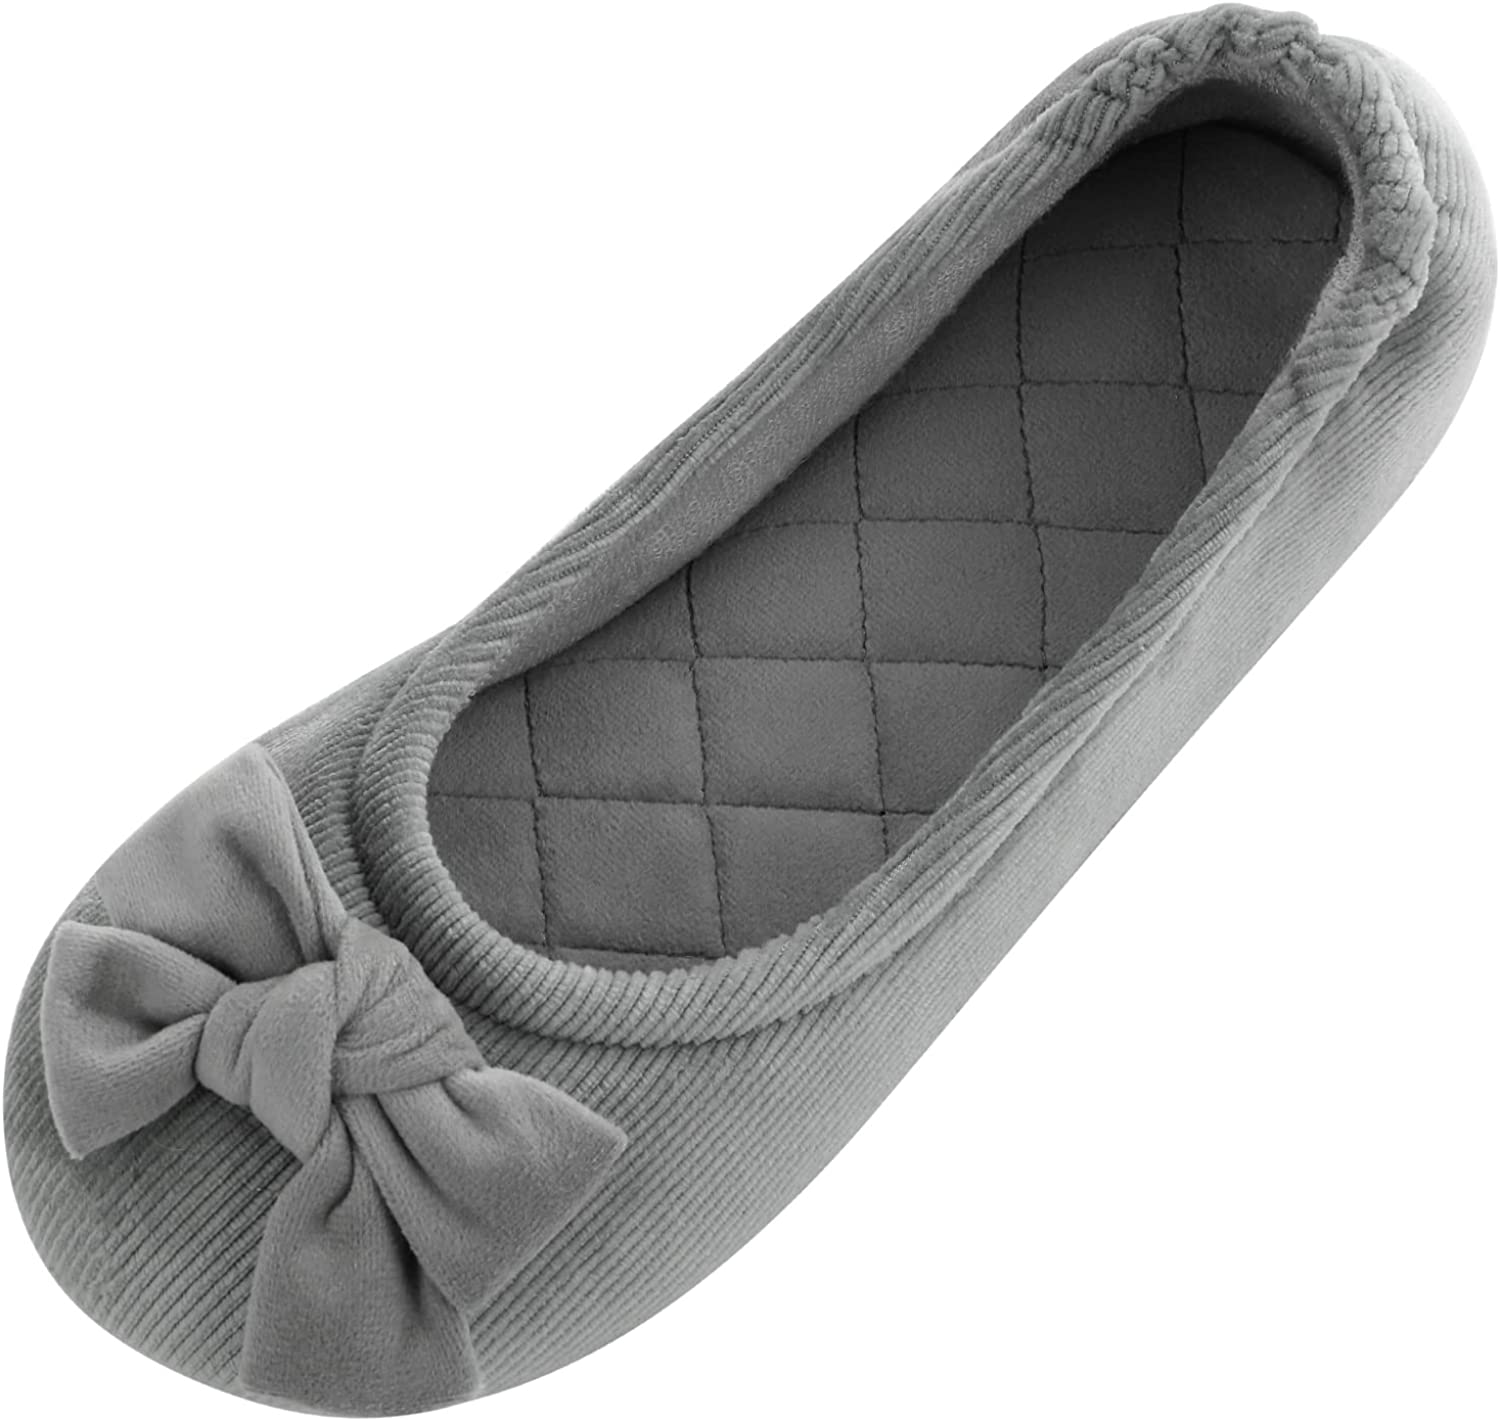 Womens Ballet Indoor Slippers with Bow | Foldable Lightweight Travel Slippers | eBay